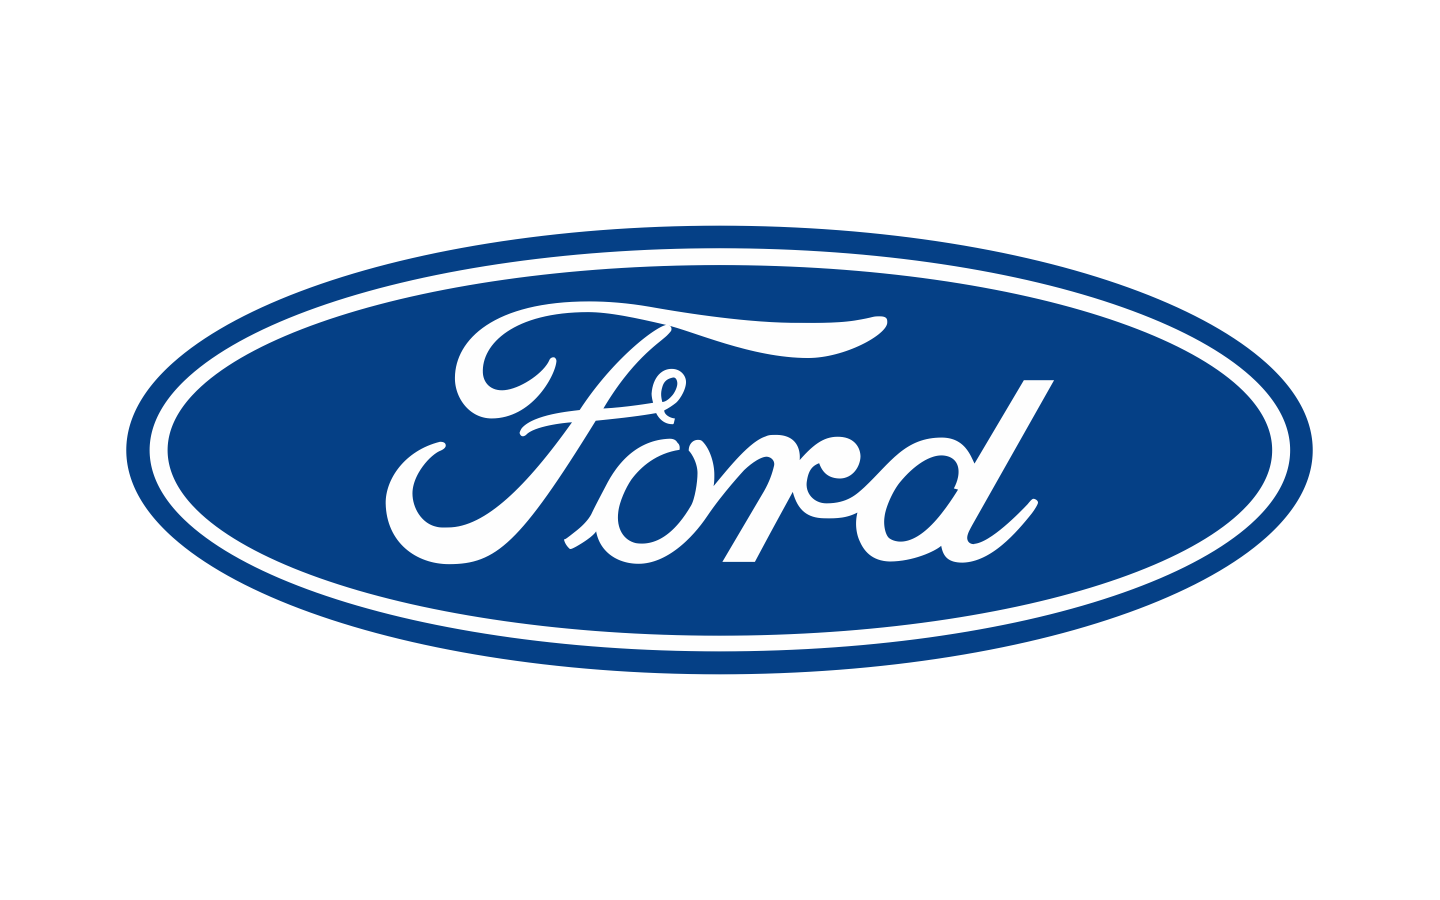 Ford Logo PNG Clipart